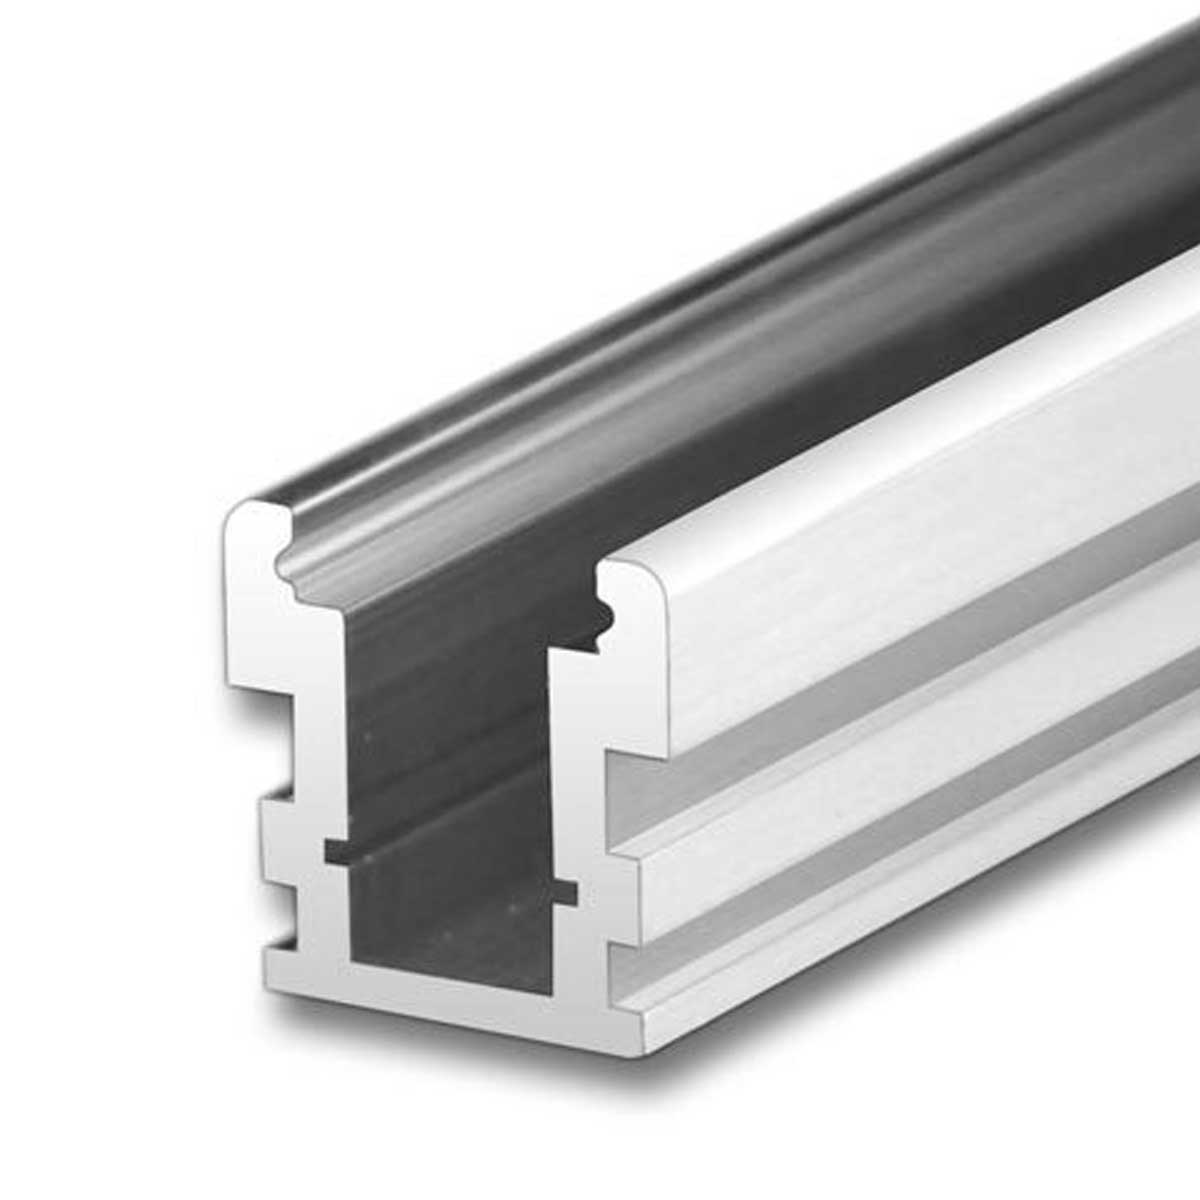 1000 Aluminium Slotted Channel Manufacturers, Suppliers in Howrah